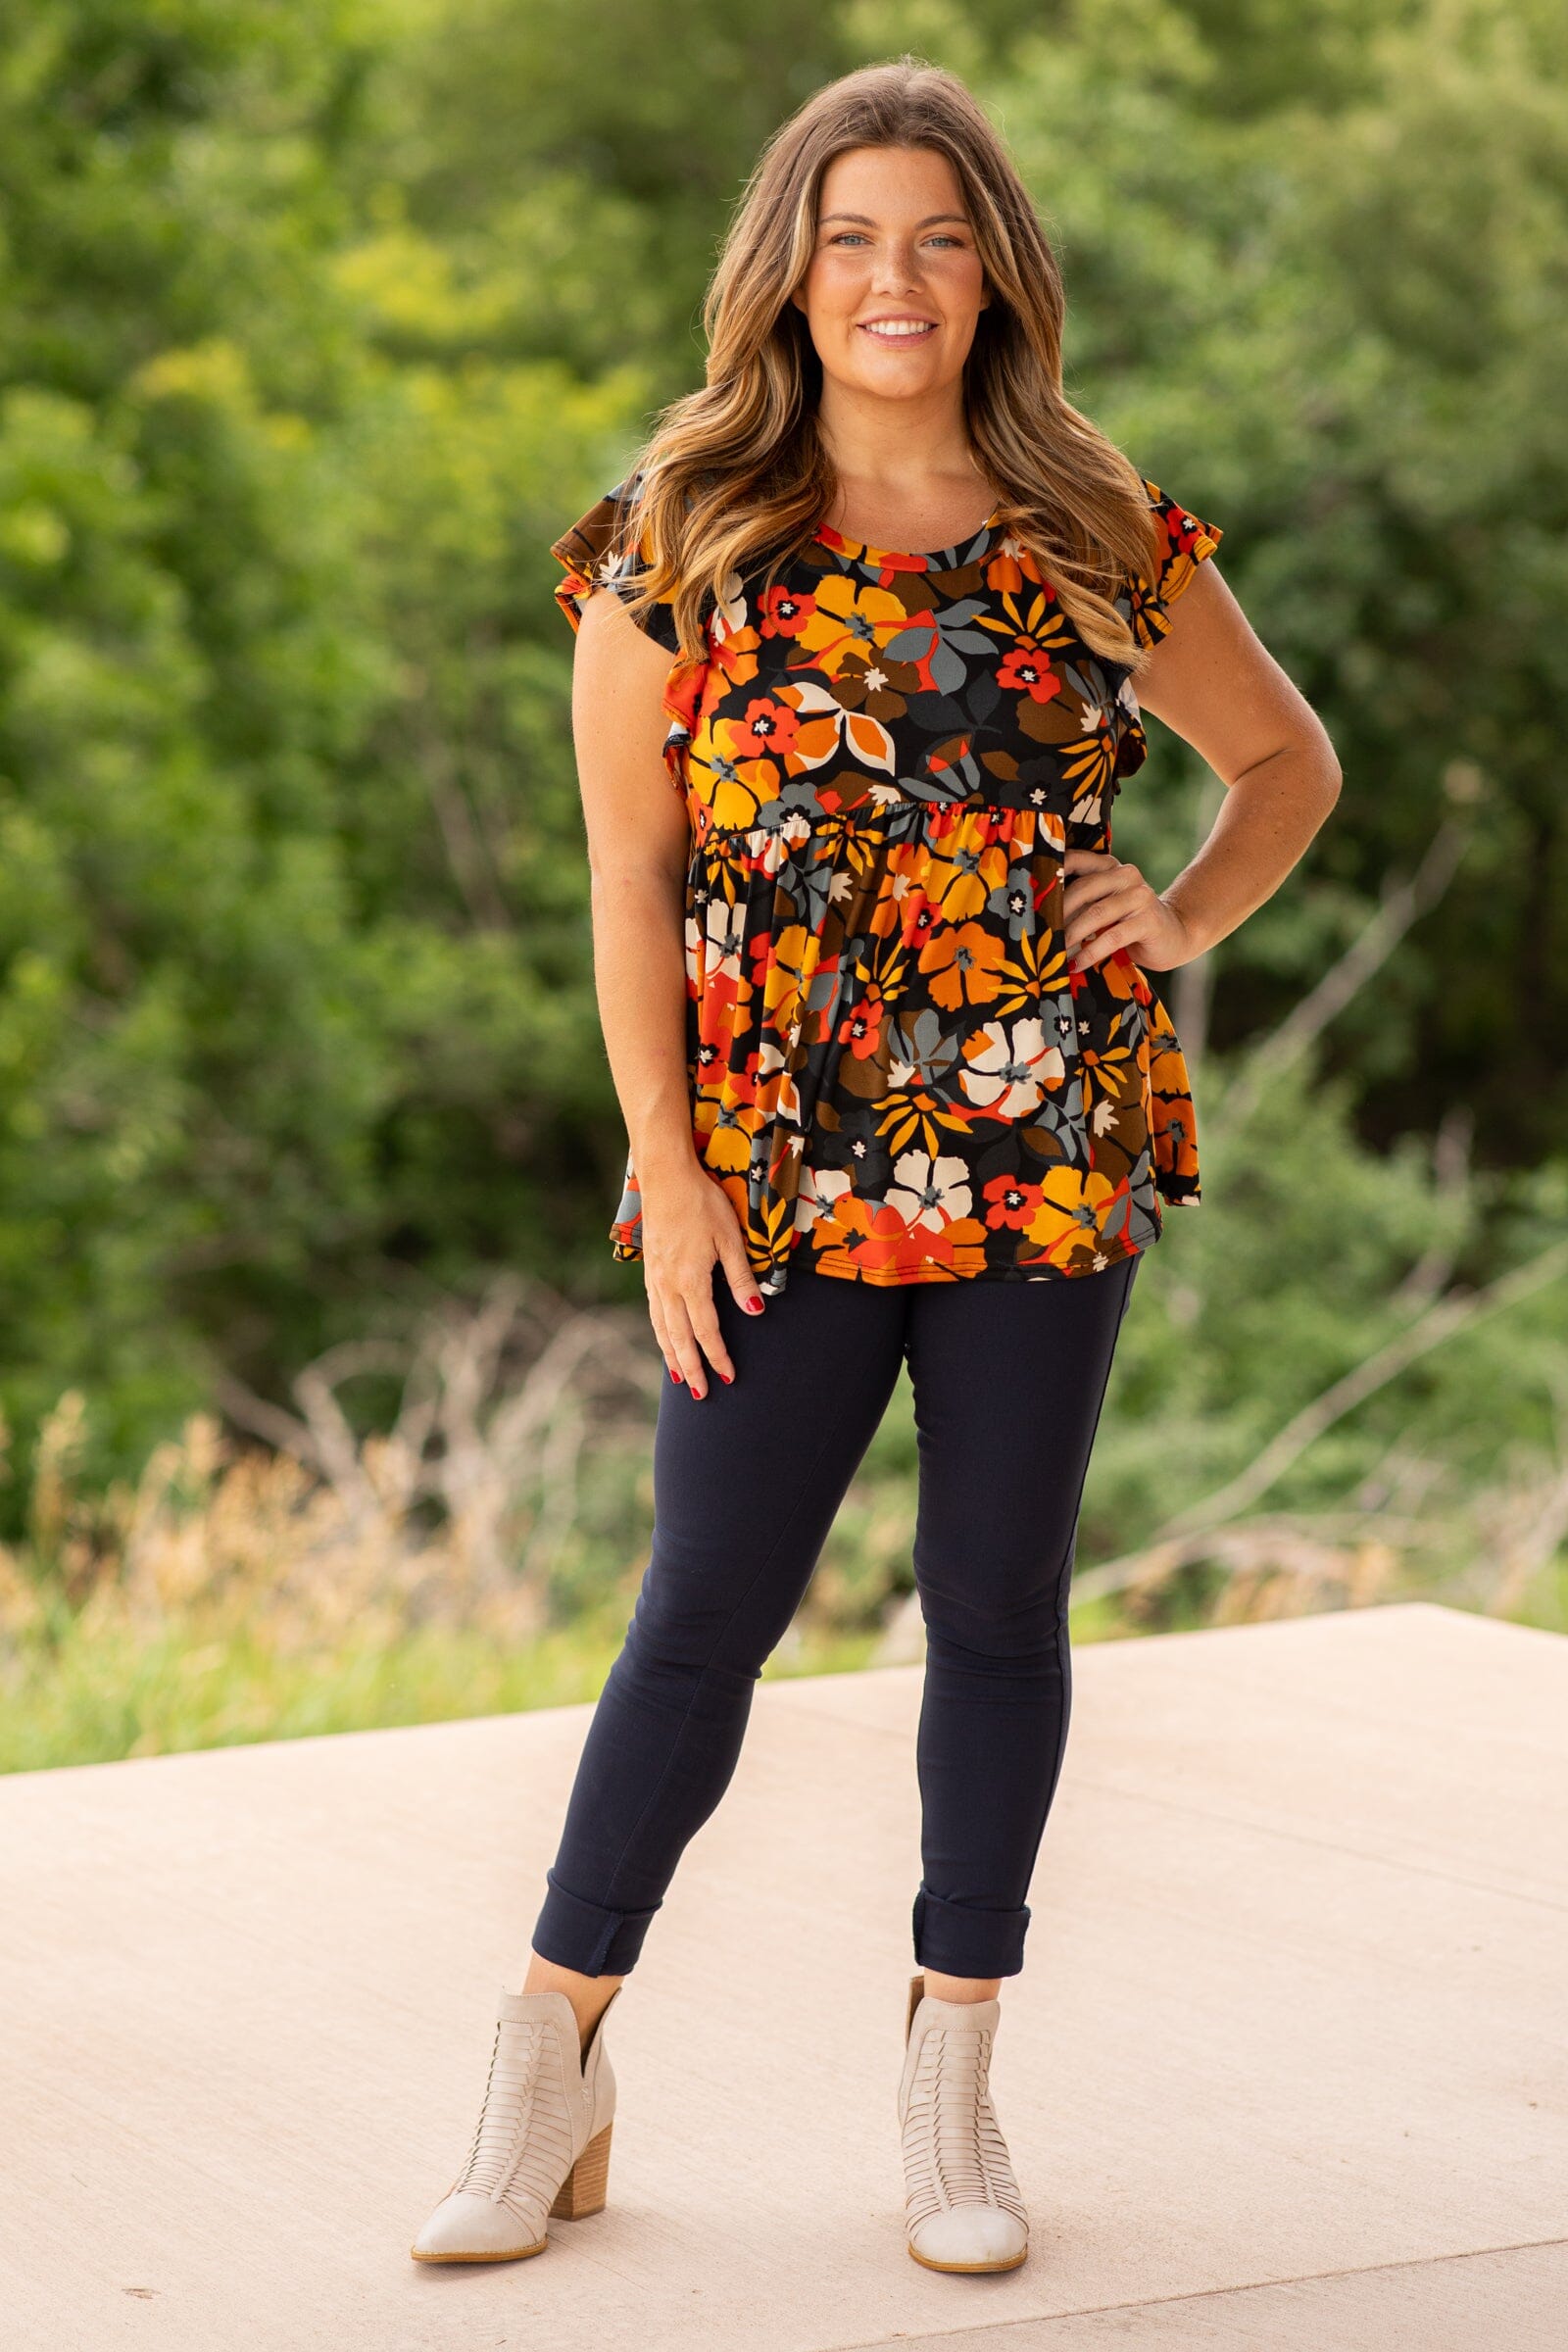 Red and Burnt Orange Floral Babydoll Top - Filly Flair